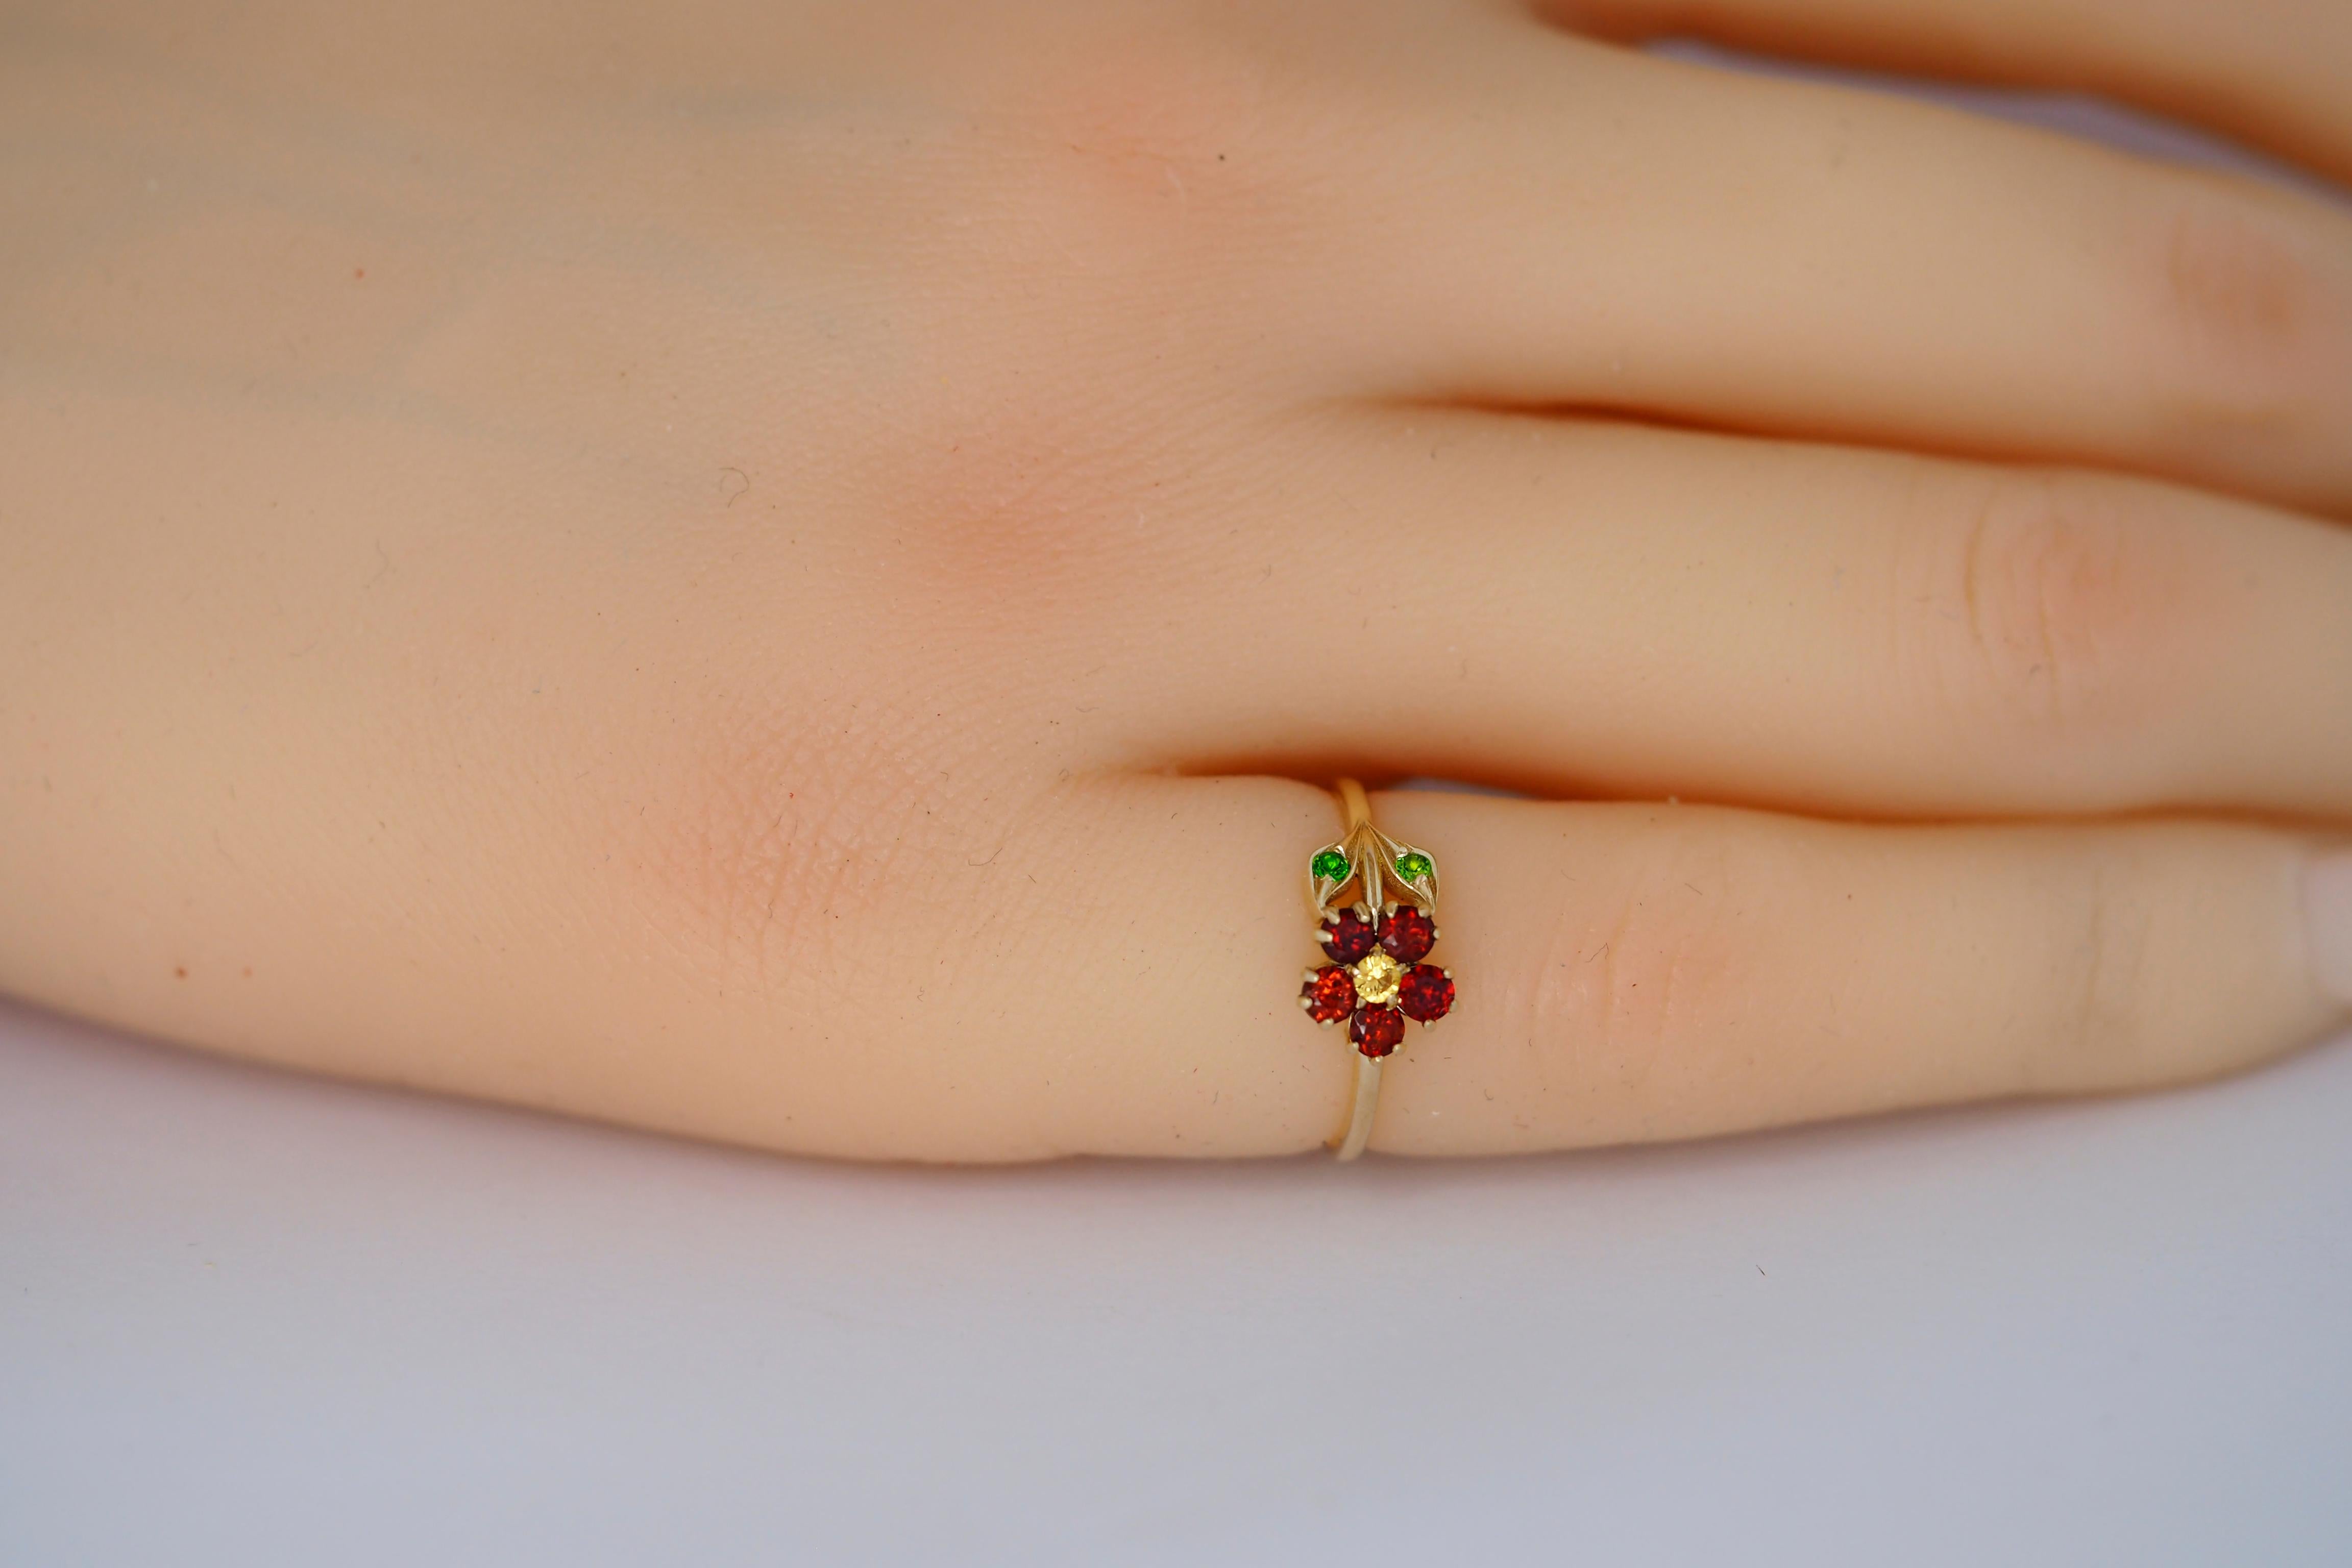 Oval Cut Flower Ring in 14 Karat Gold, Sapphire, Garnet and Chrome Diopsides Ring.  For Sale